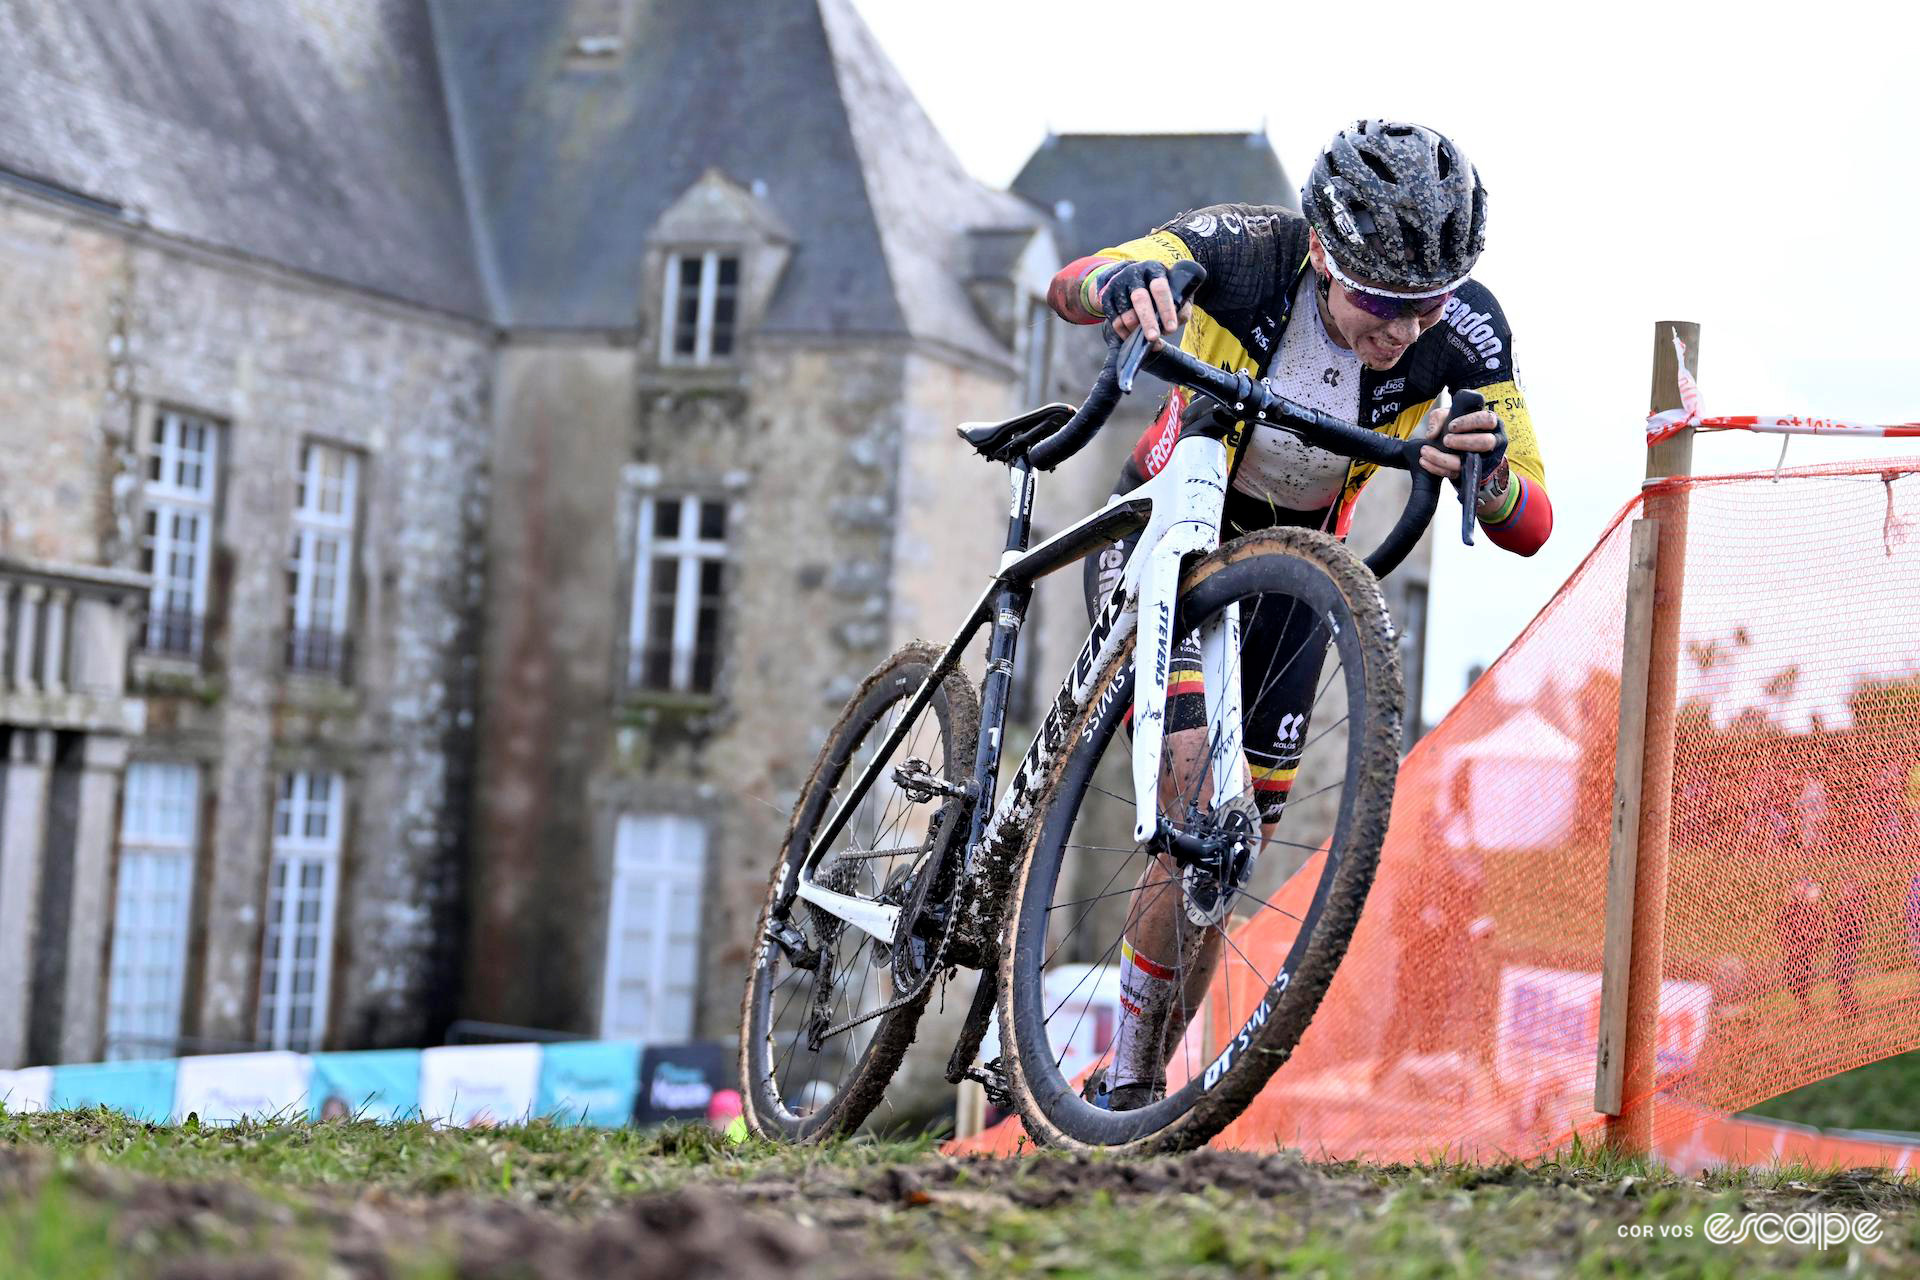 Sanne Cant's Belgian national champion's jersey is unzipped as she pushes her bike up a ramp during Cyclocross World Cup Flamanville, the castle in the background.